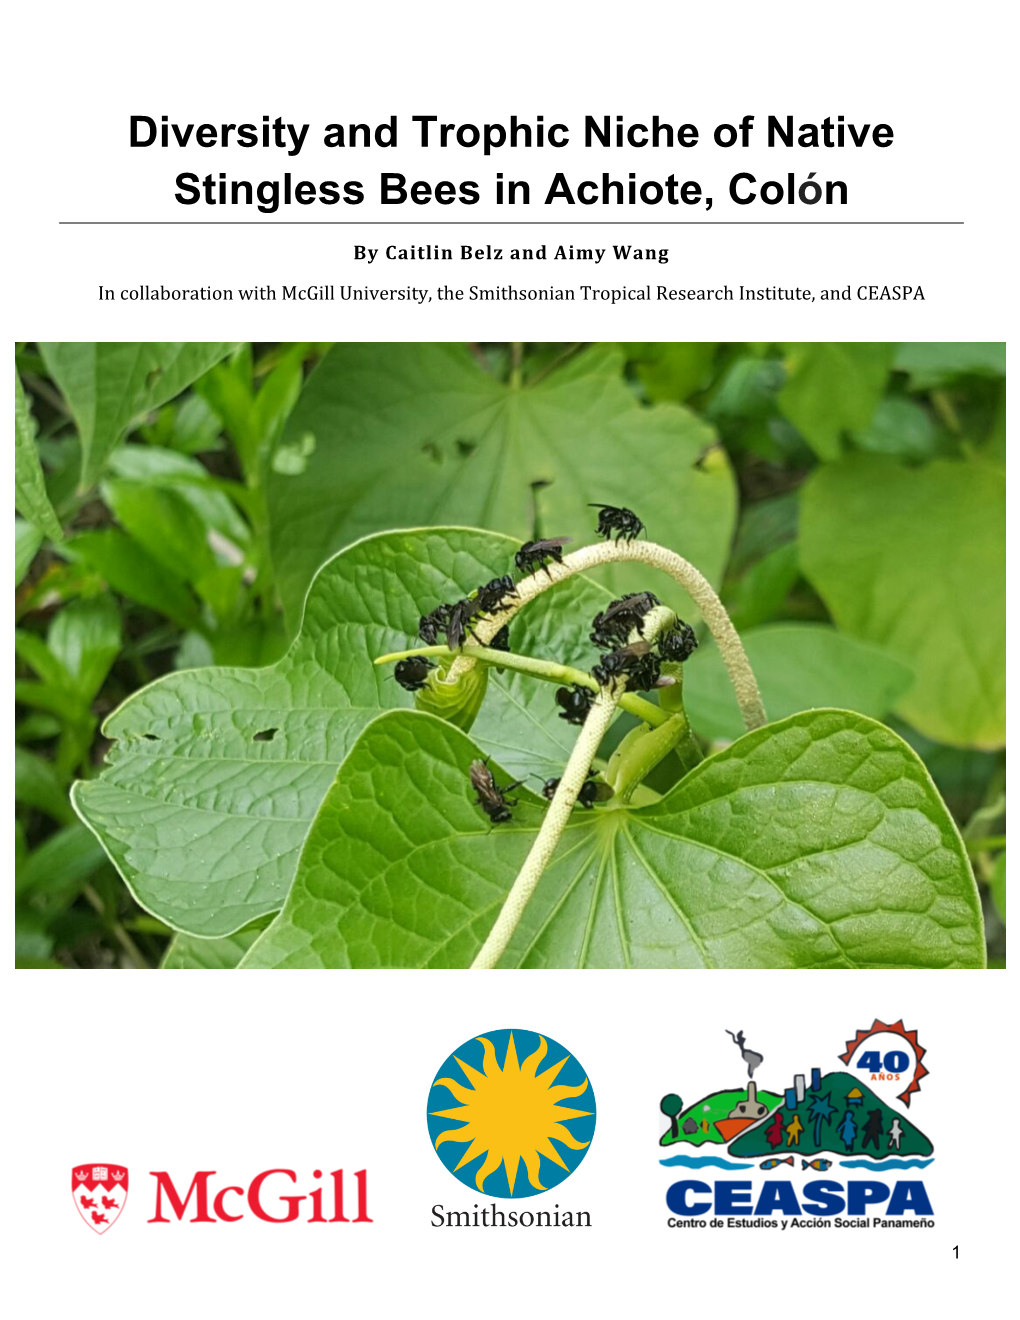 Diversity and Trophic Niche of Native Stingless Bees in Achiote, Colón.Pdf